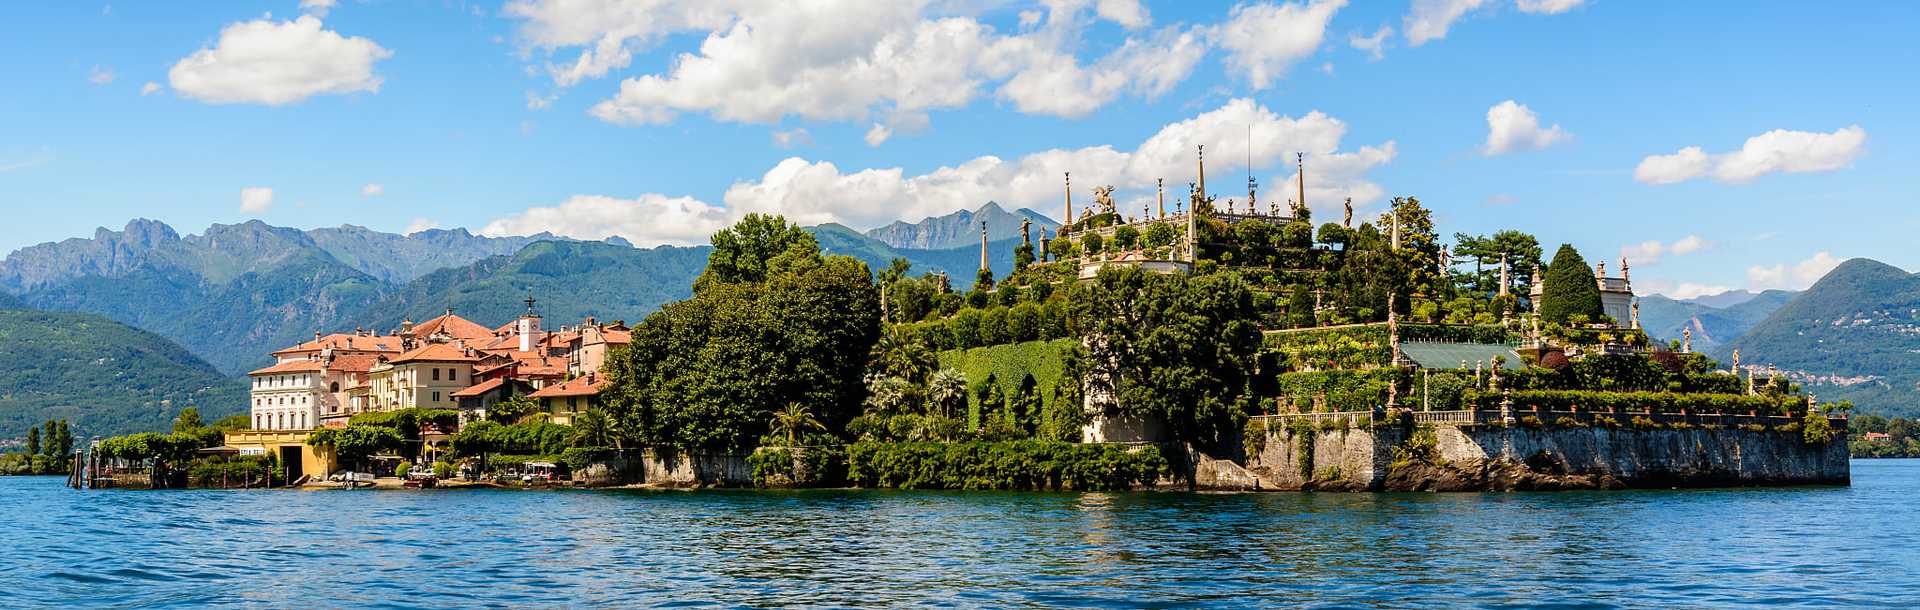 Isola Bella in the middle of Lake Maggiore, Italy.